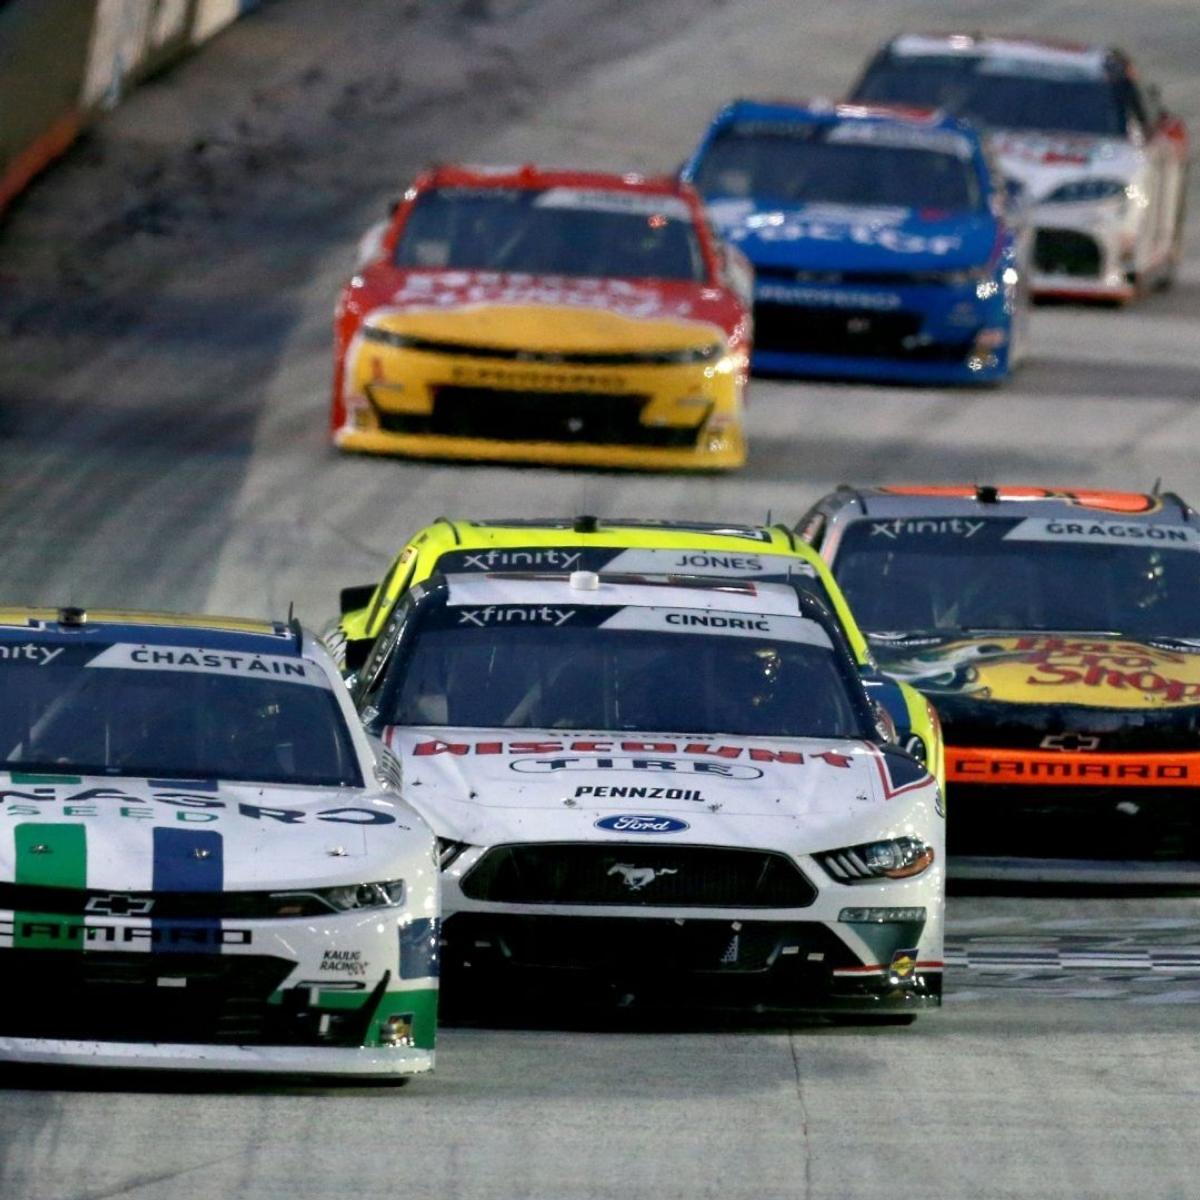 NASCAR announces 2021 networks and start times headlined by historic Food City Dirt Race at Bristol Motor Speedway News Media Bristol Motor Speedway